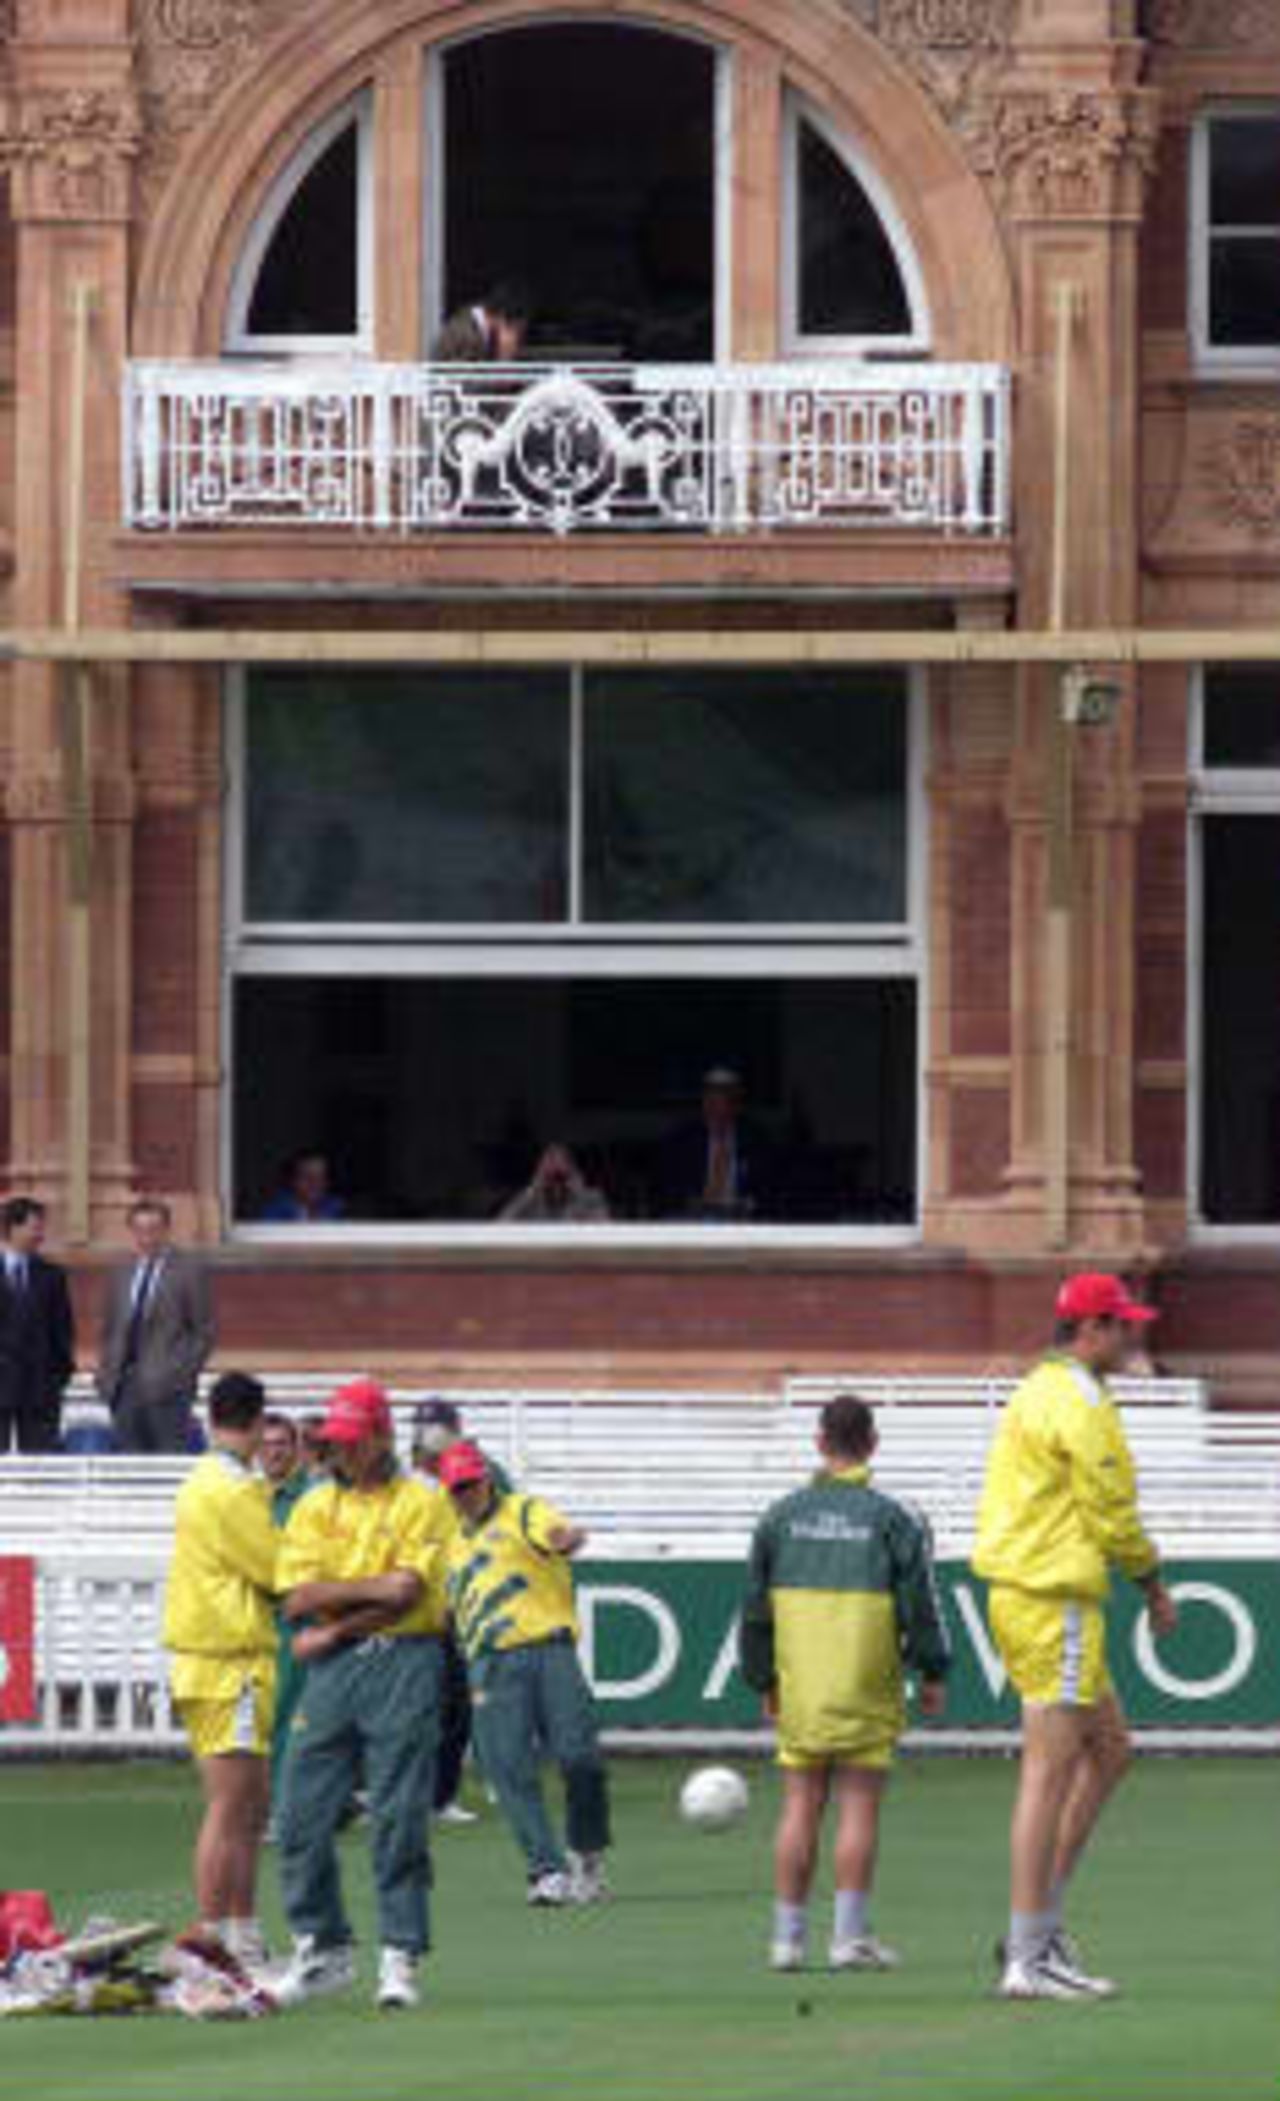 Members of the Australian team examine the pitch before putting in some light training 20 June 1999 before the start of the World Cup Cricket final against Pakistan at Lords in London